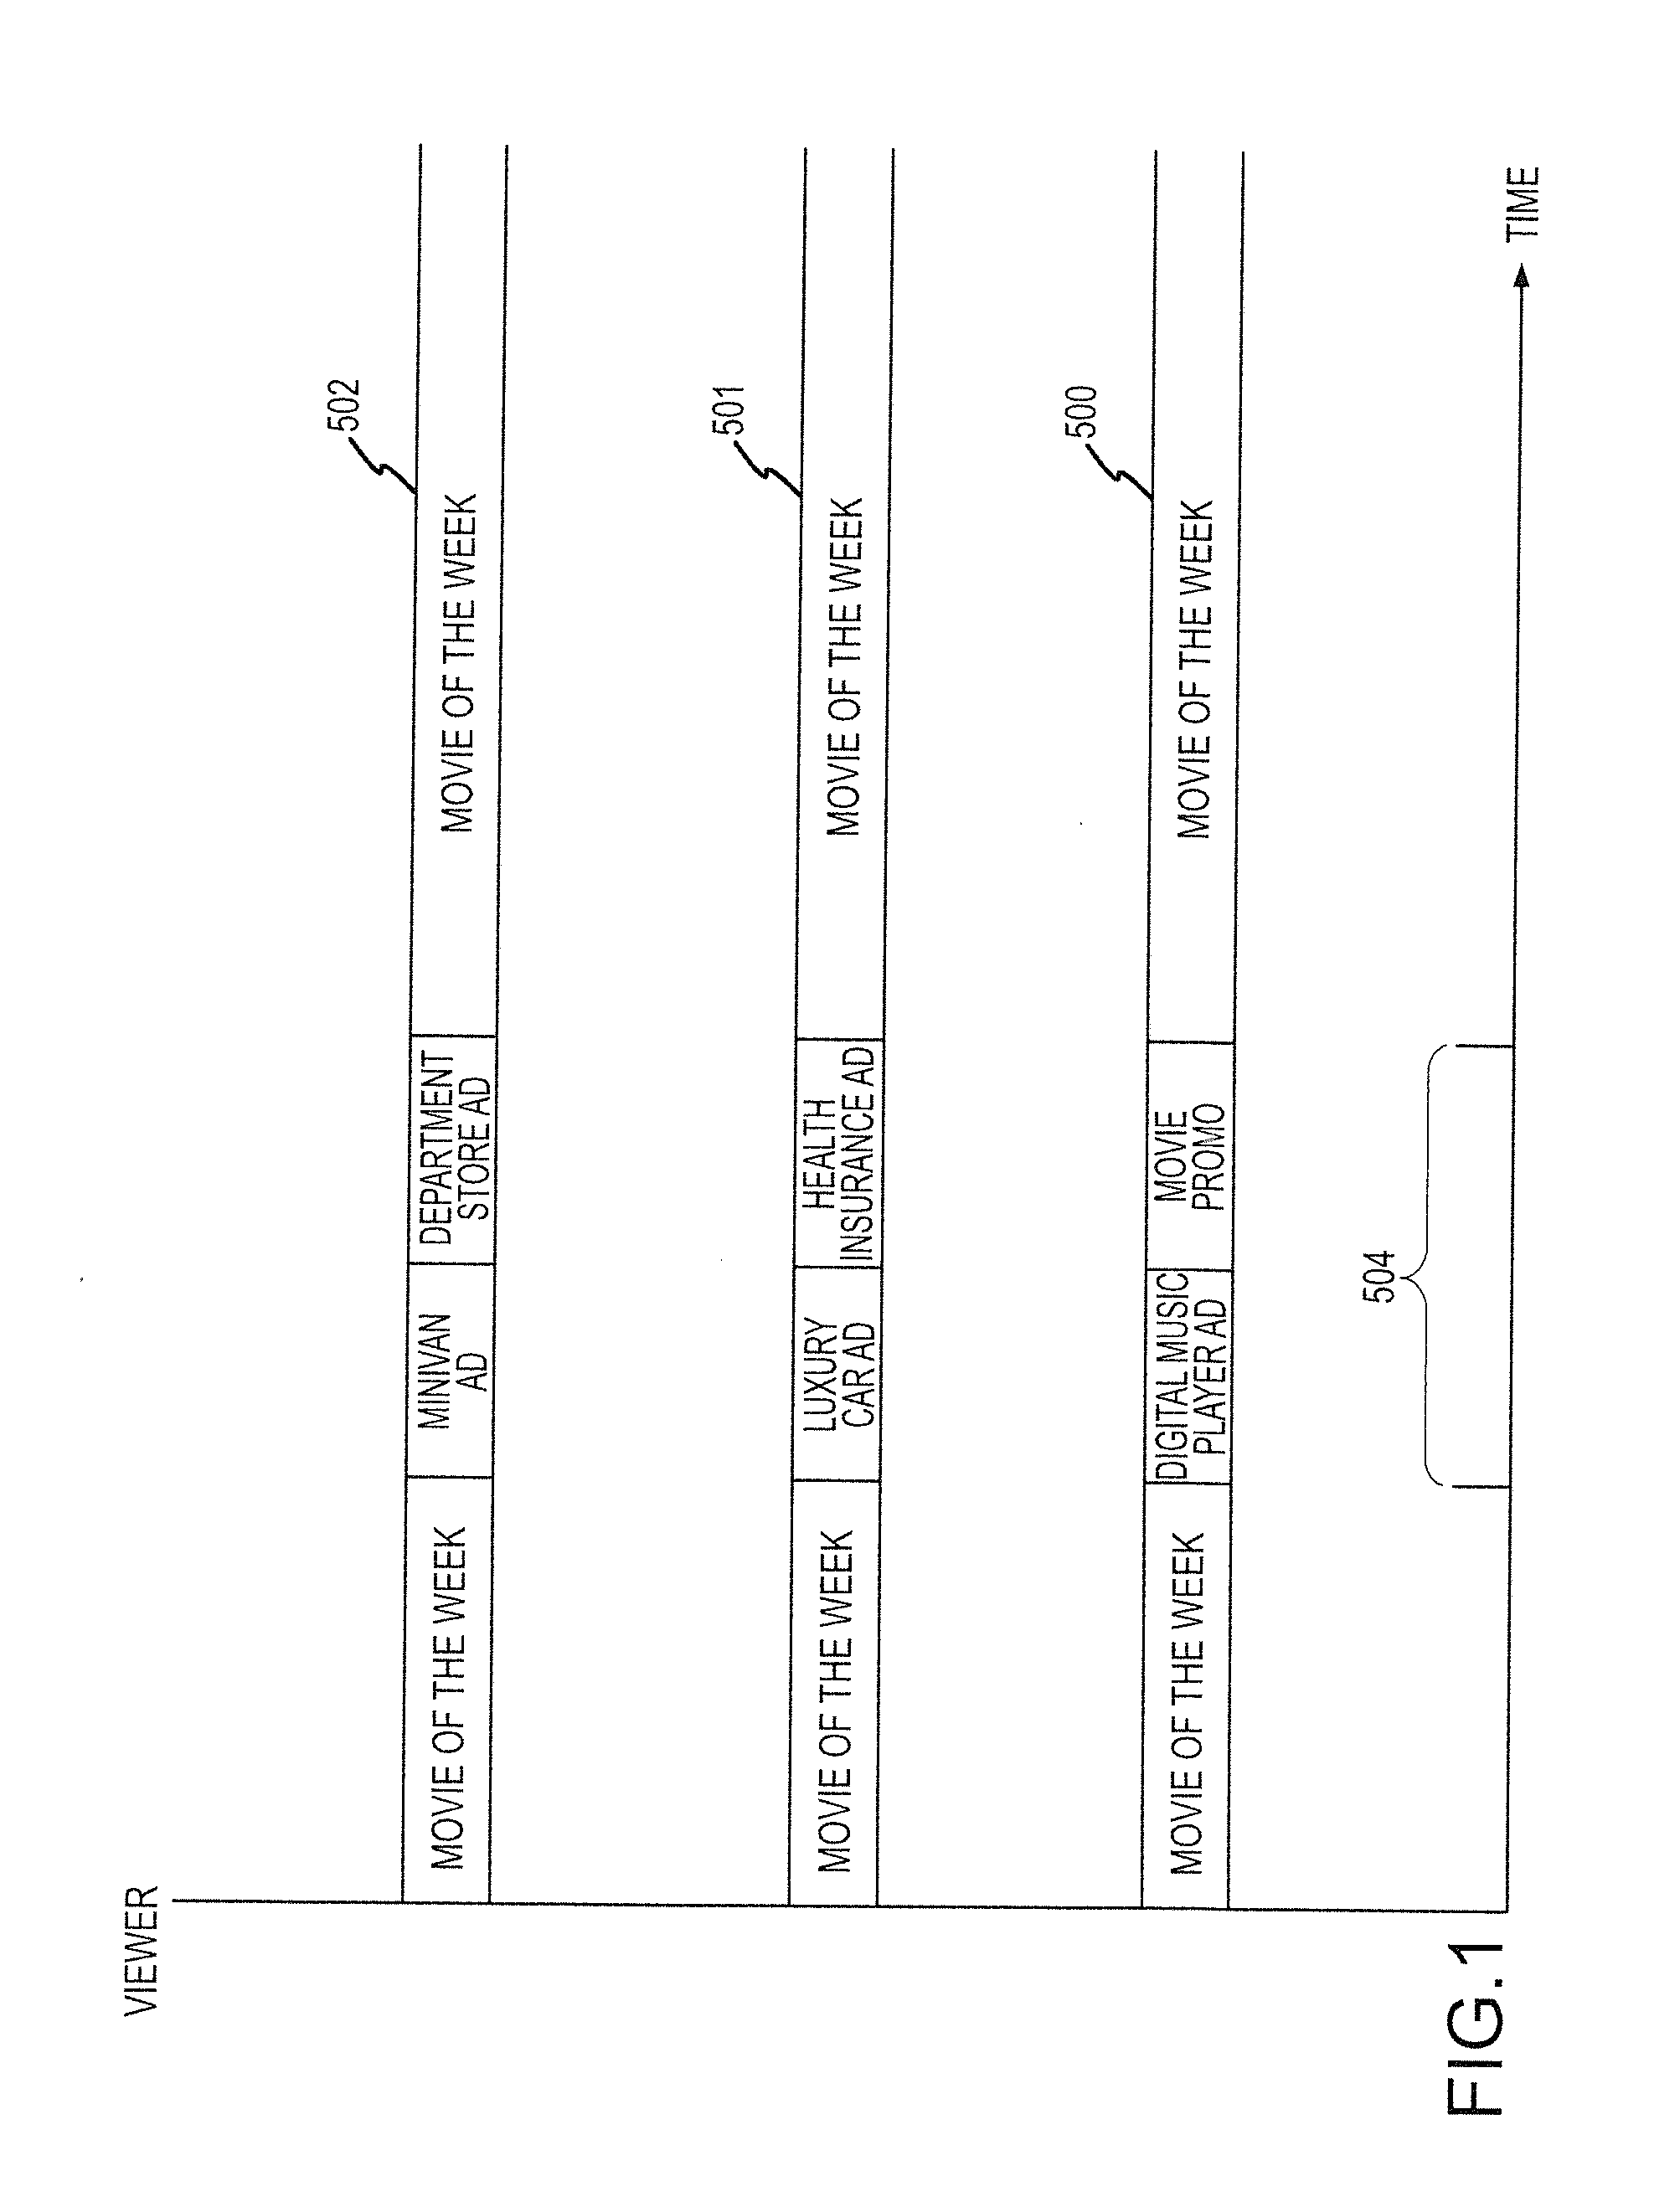 Method and apparatus to perform real-time audience estimation and commercial selection suitable for targeted advertising